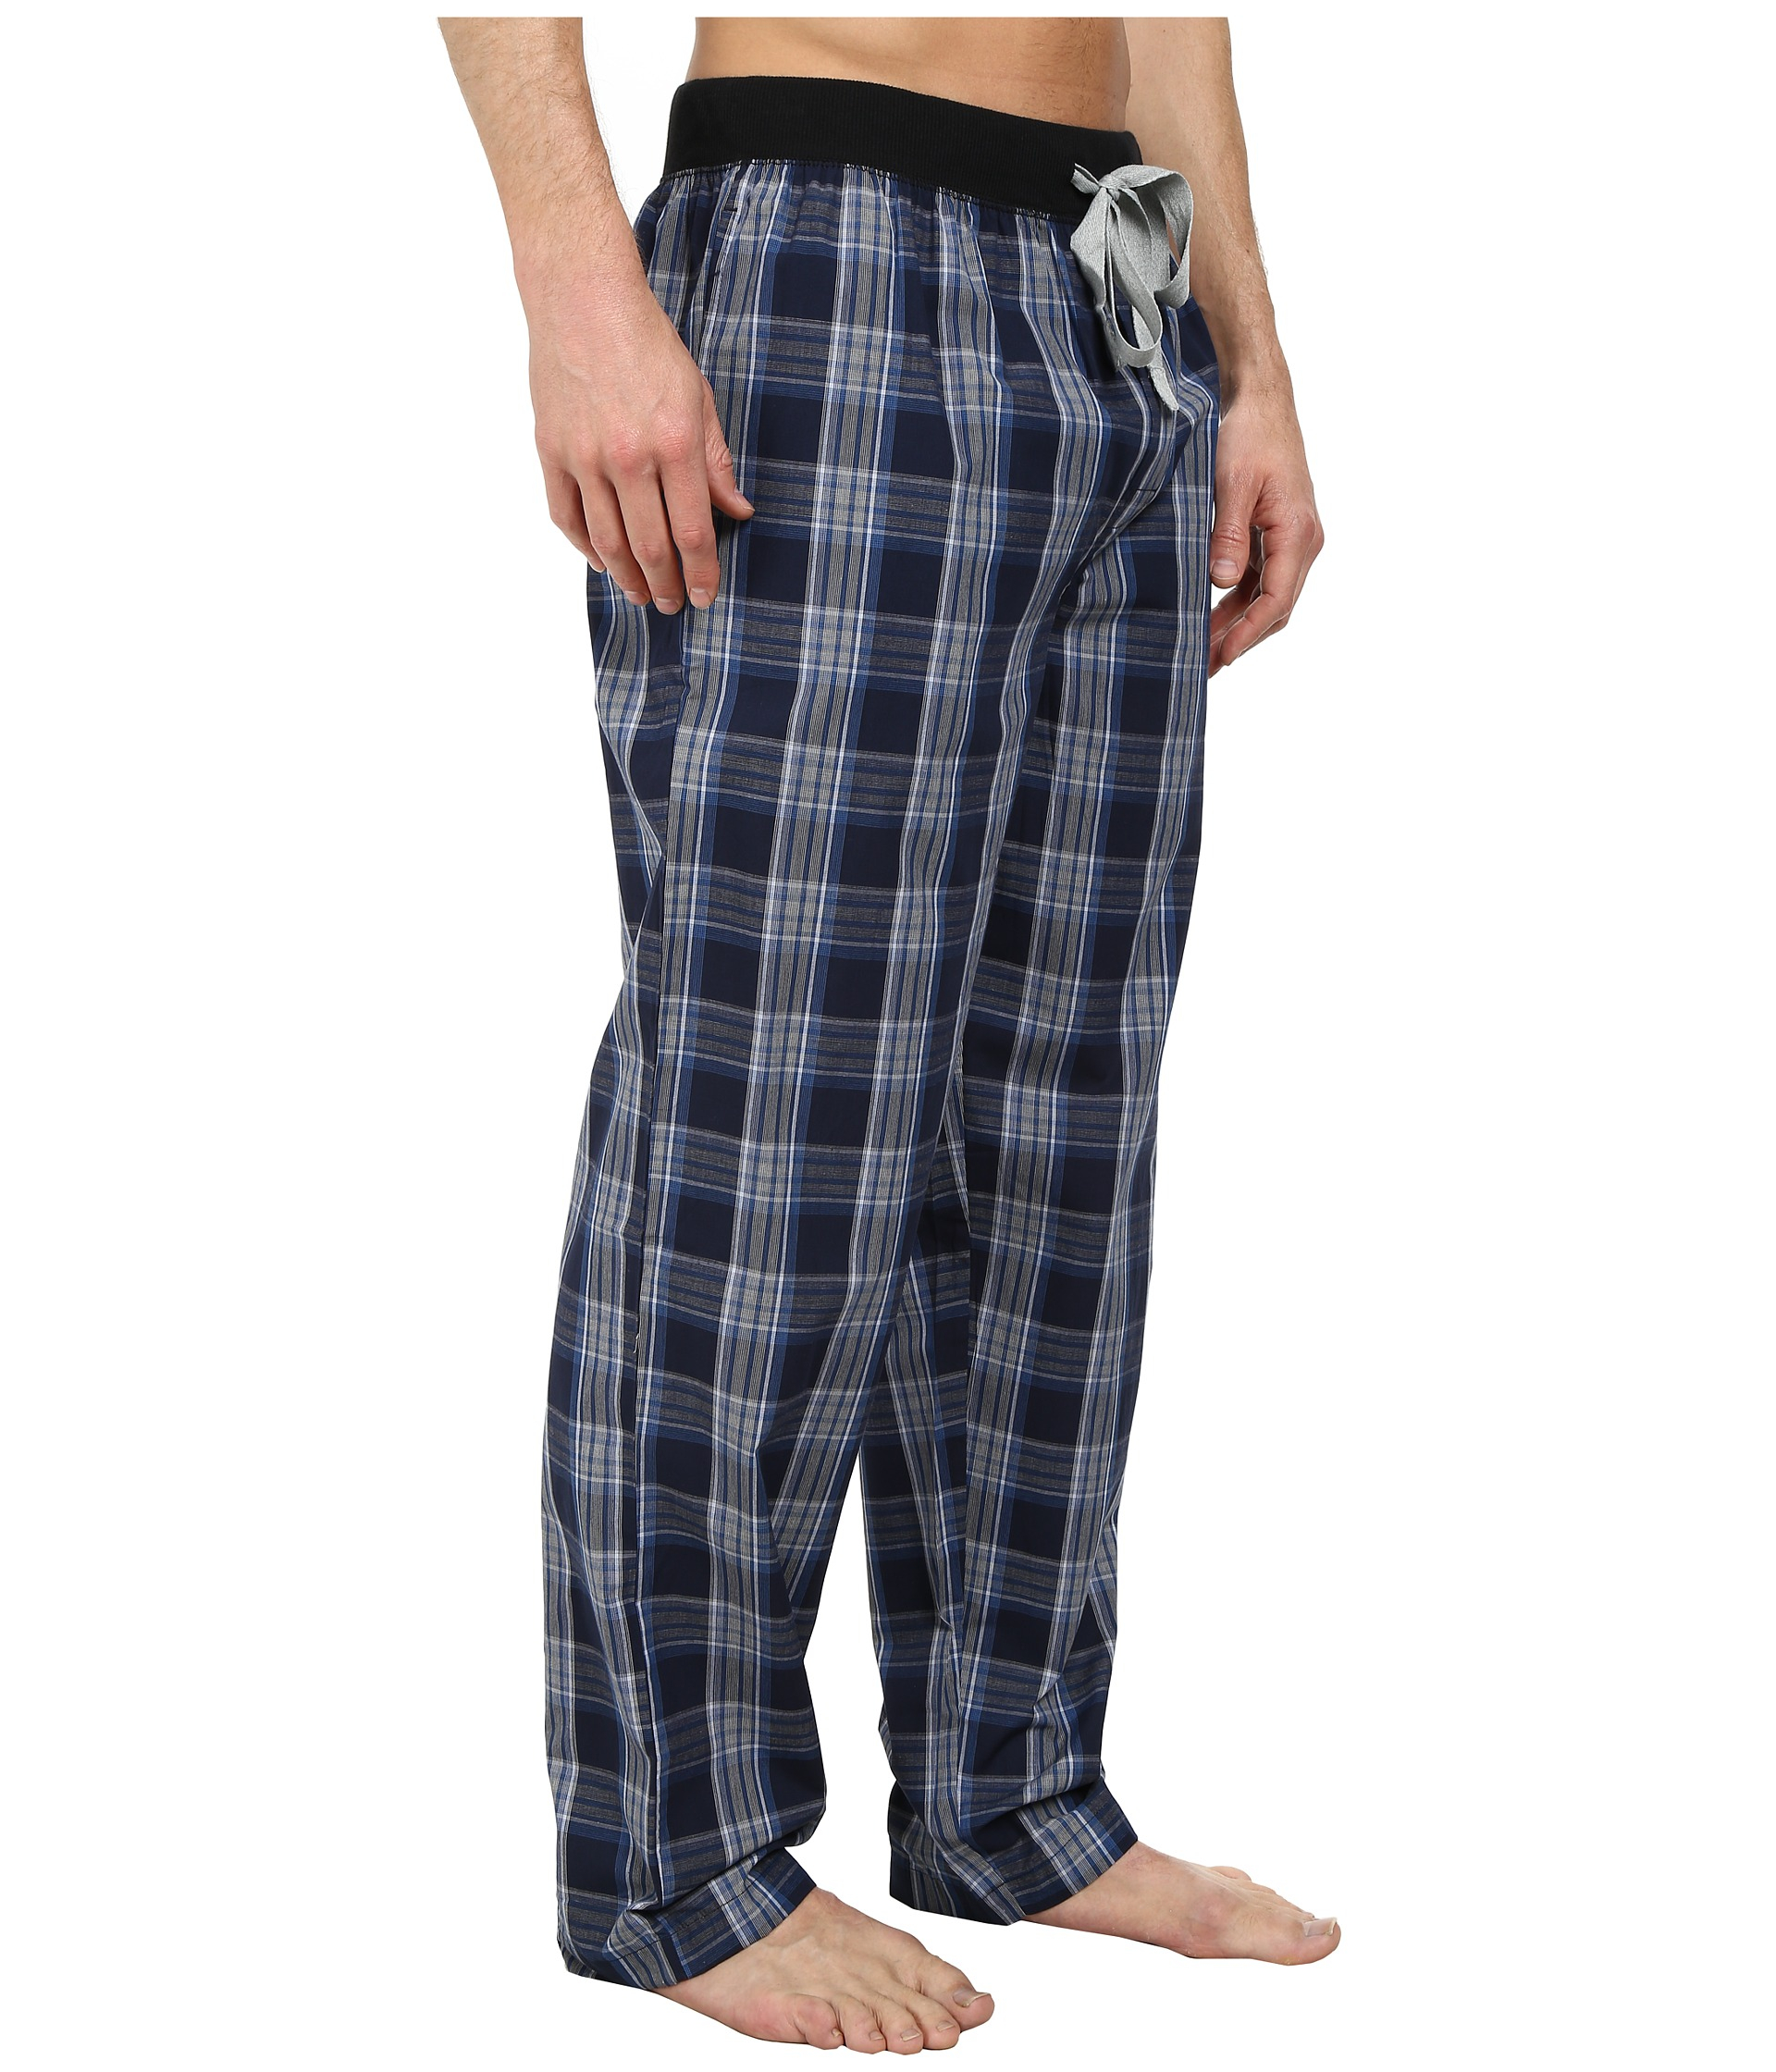 Lyst - Kenneth Cole Reaction Lounge Pants in Blue for Men